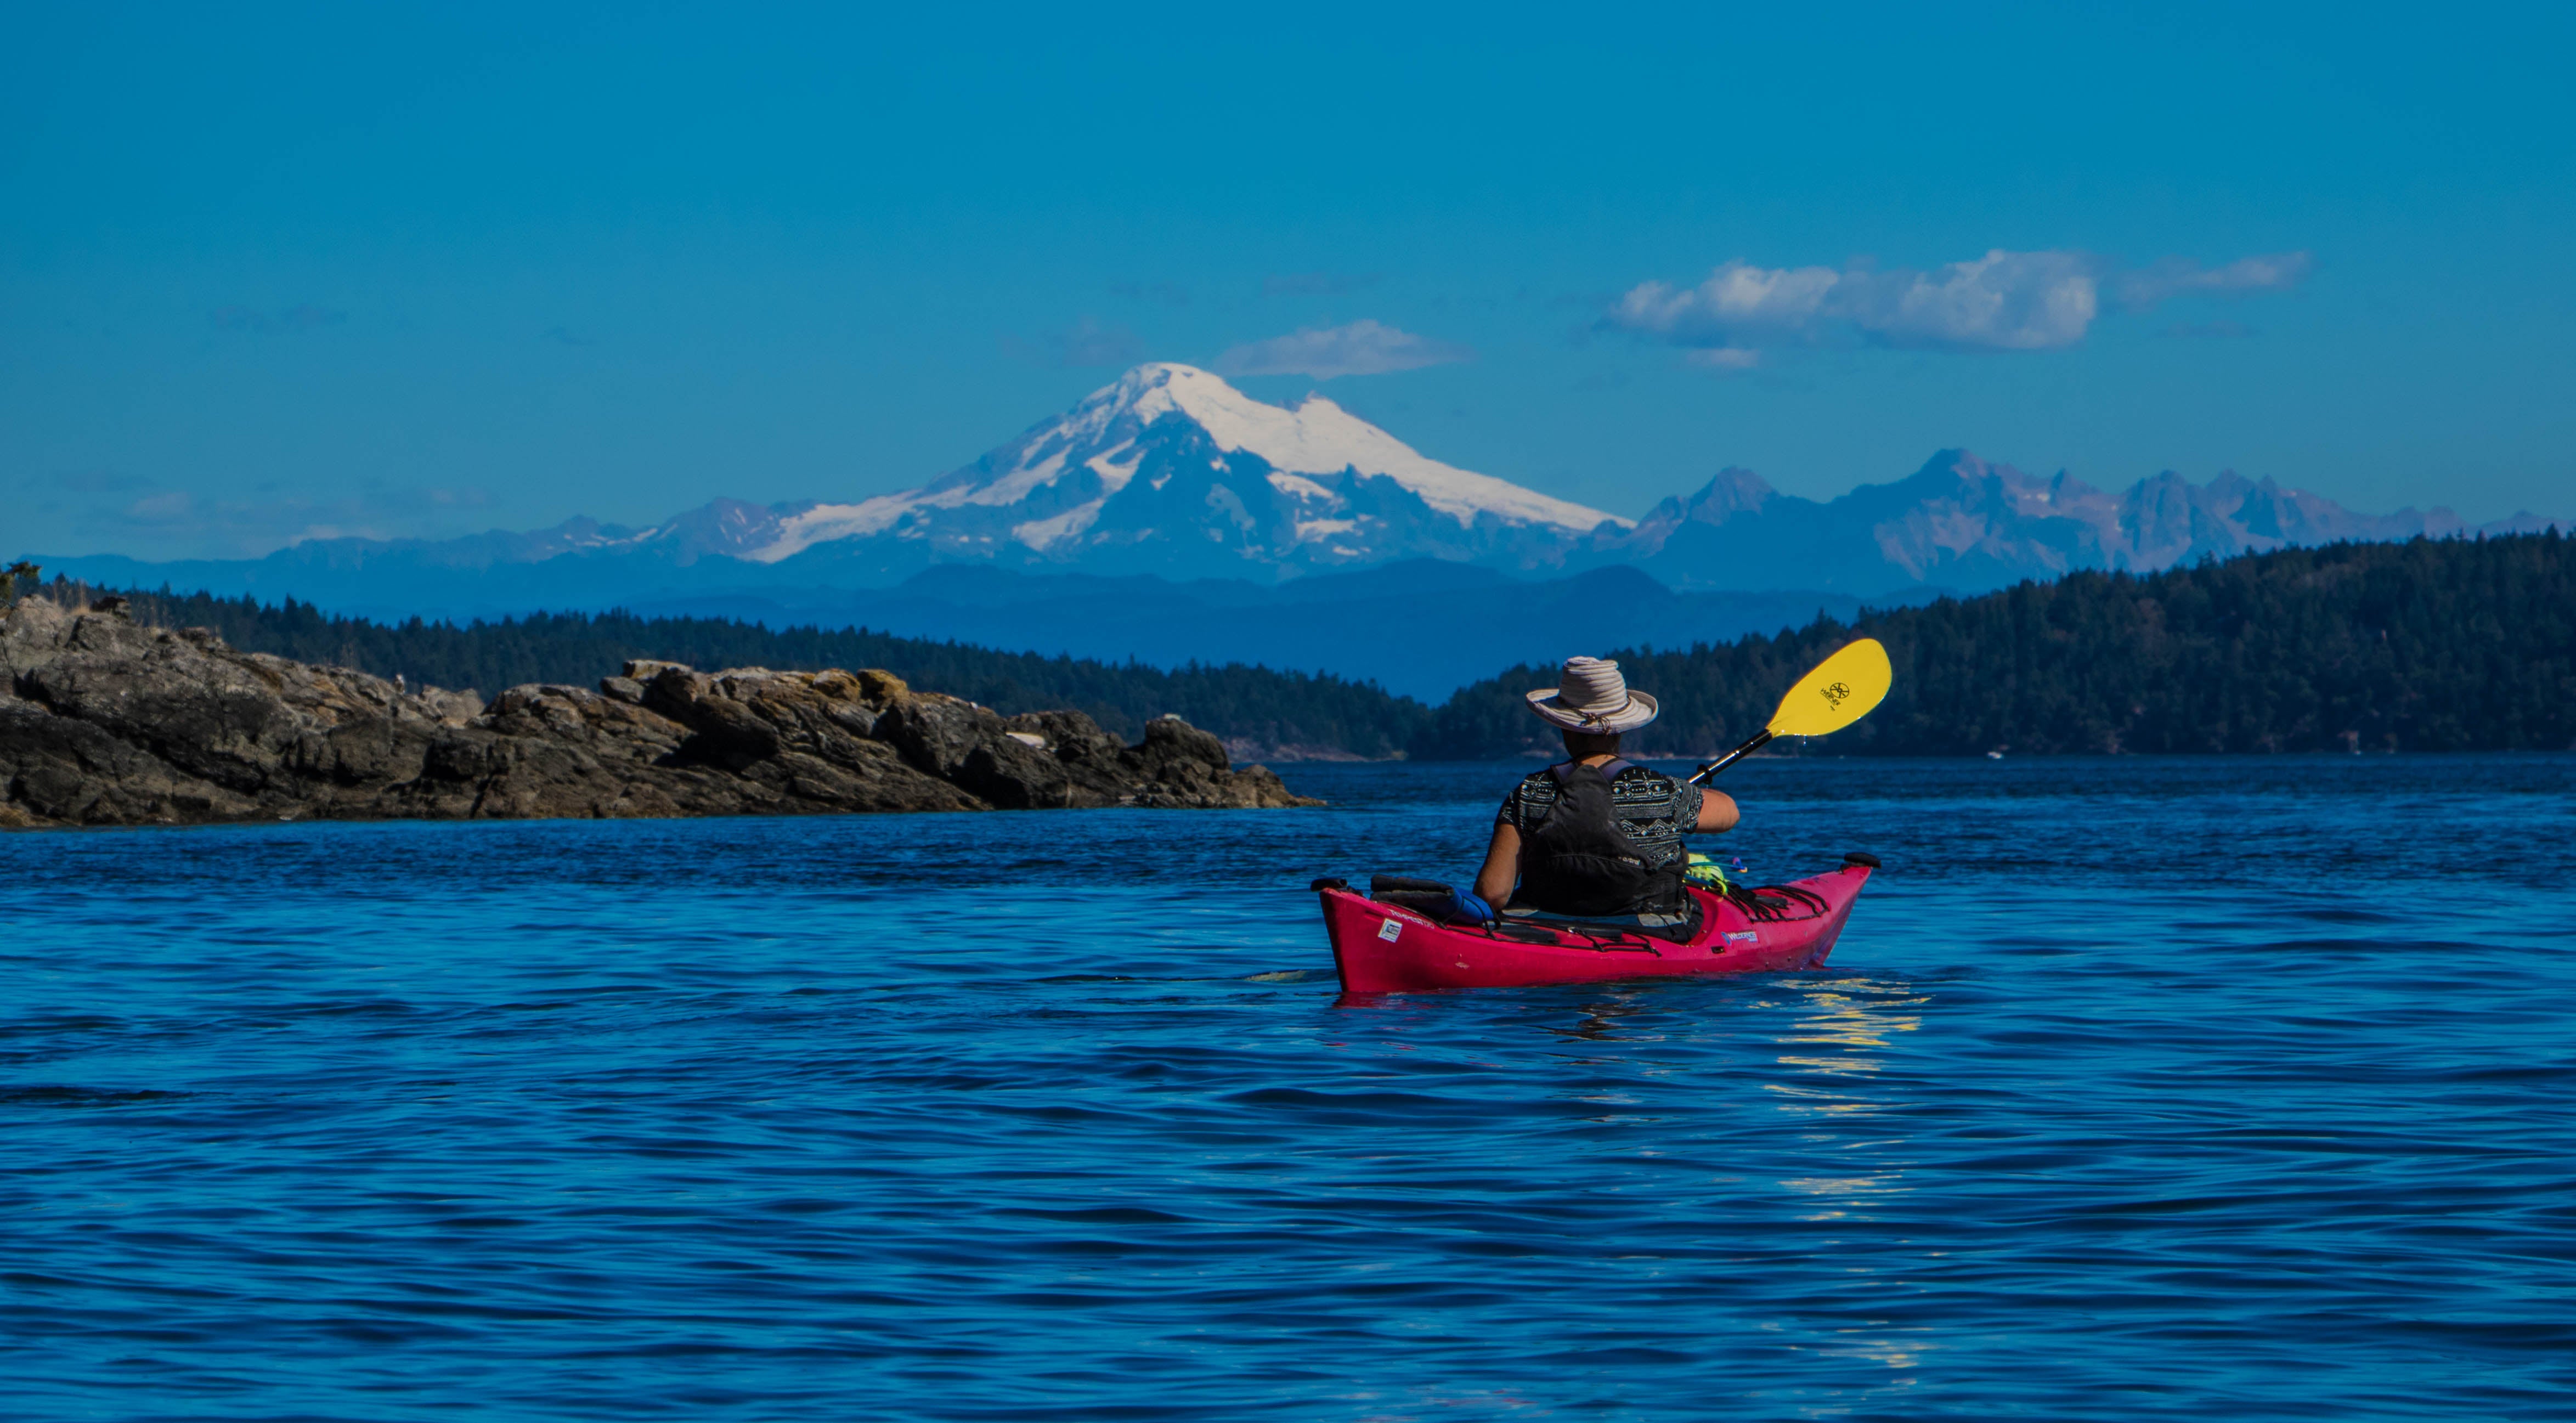 This view of Mt. Baker is about a 20 minute paddle from this park!